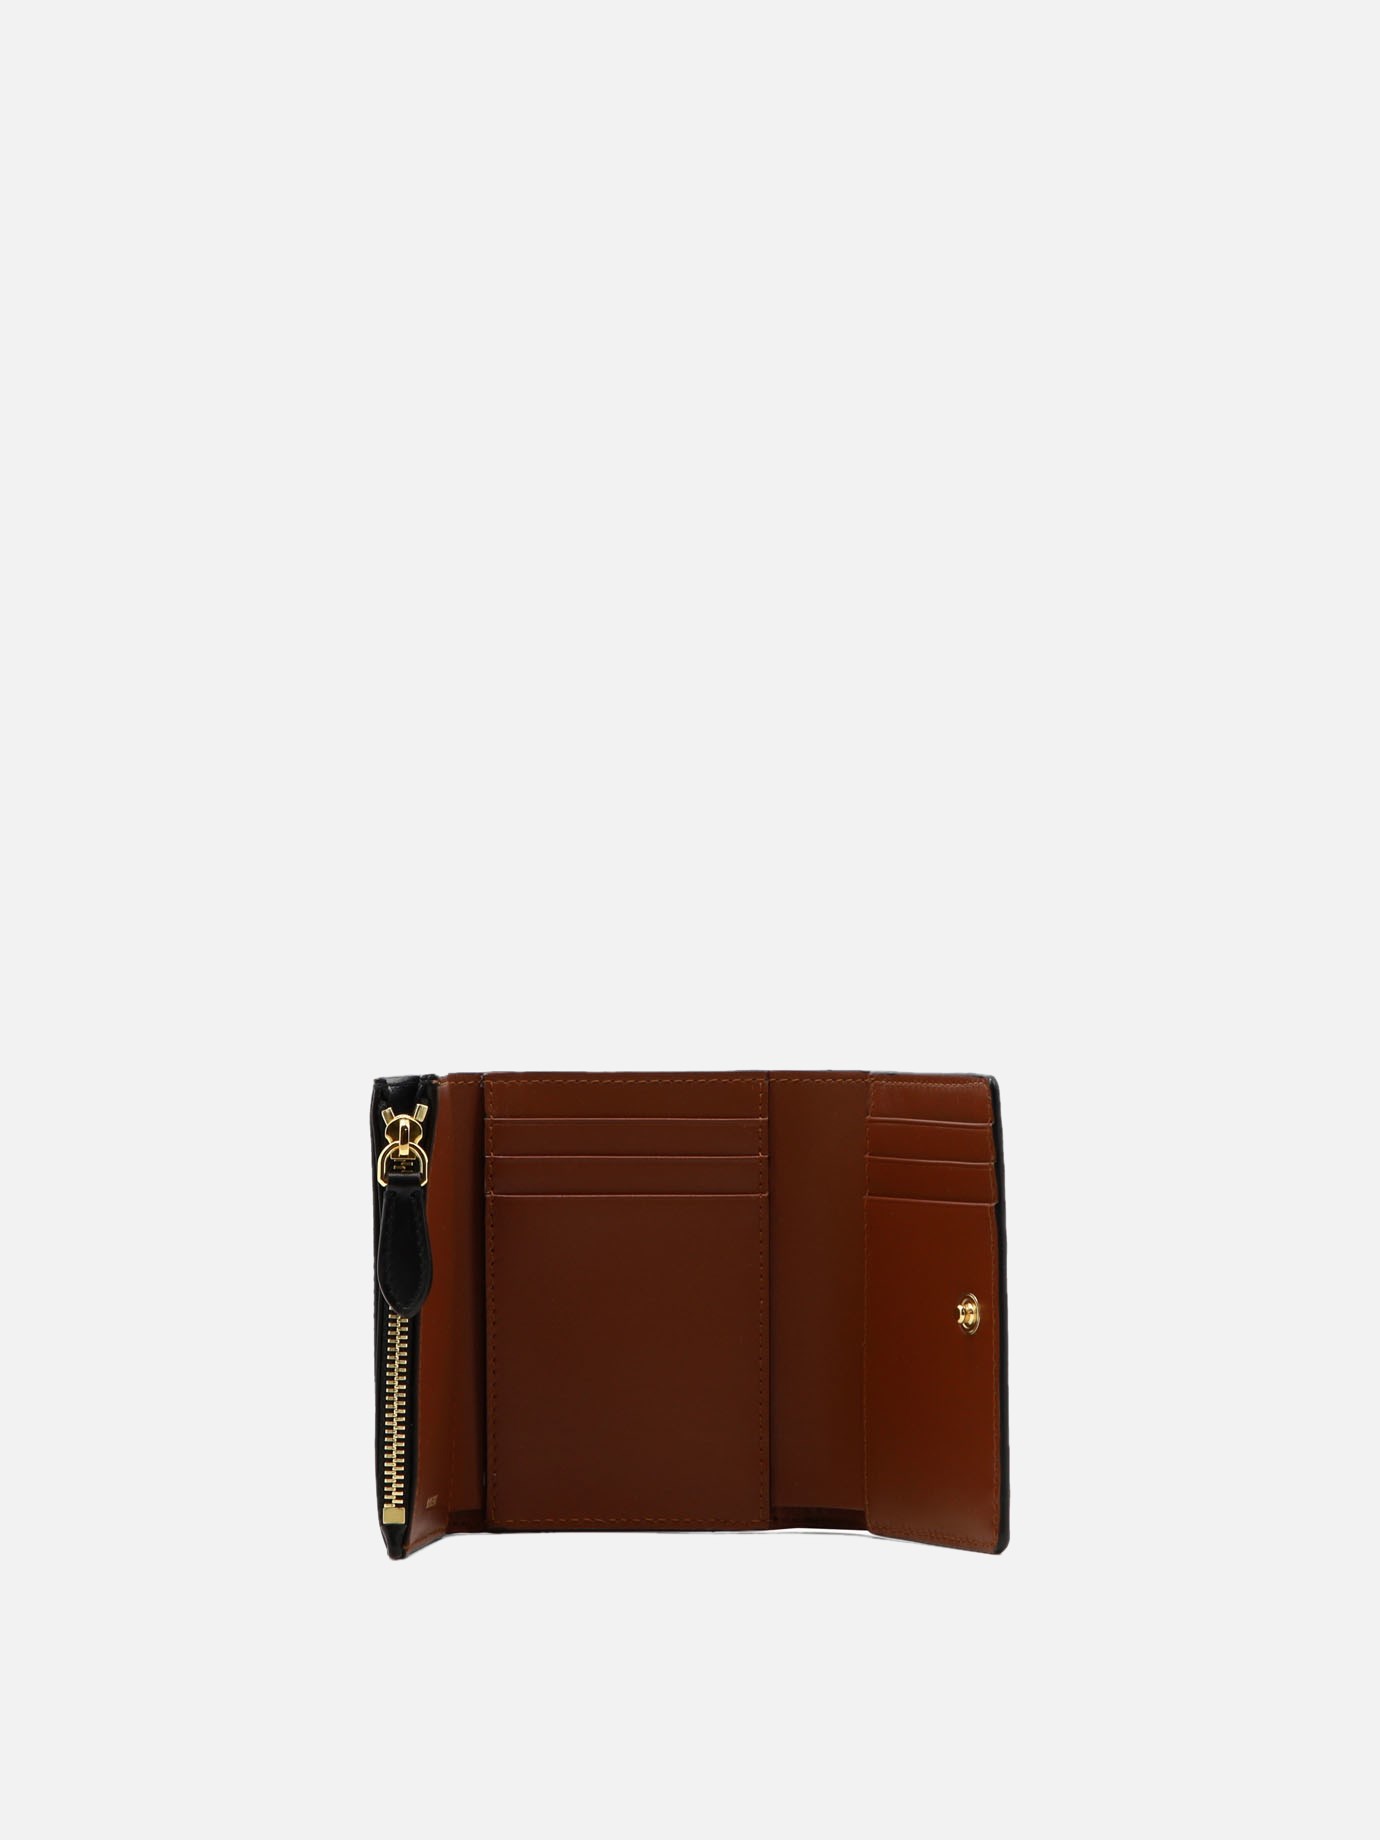  Icon Stripe  wallet by Burberry